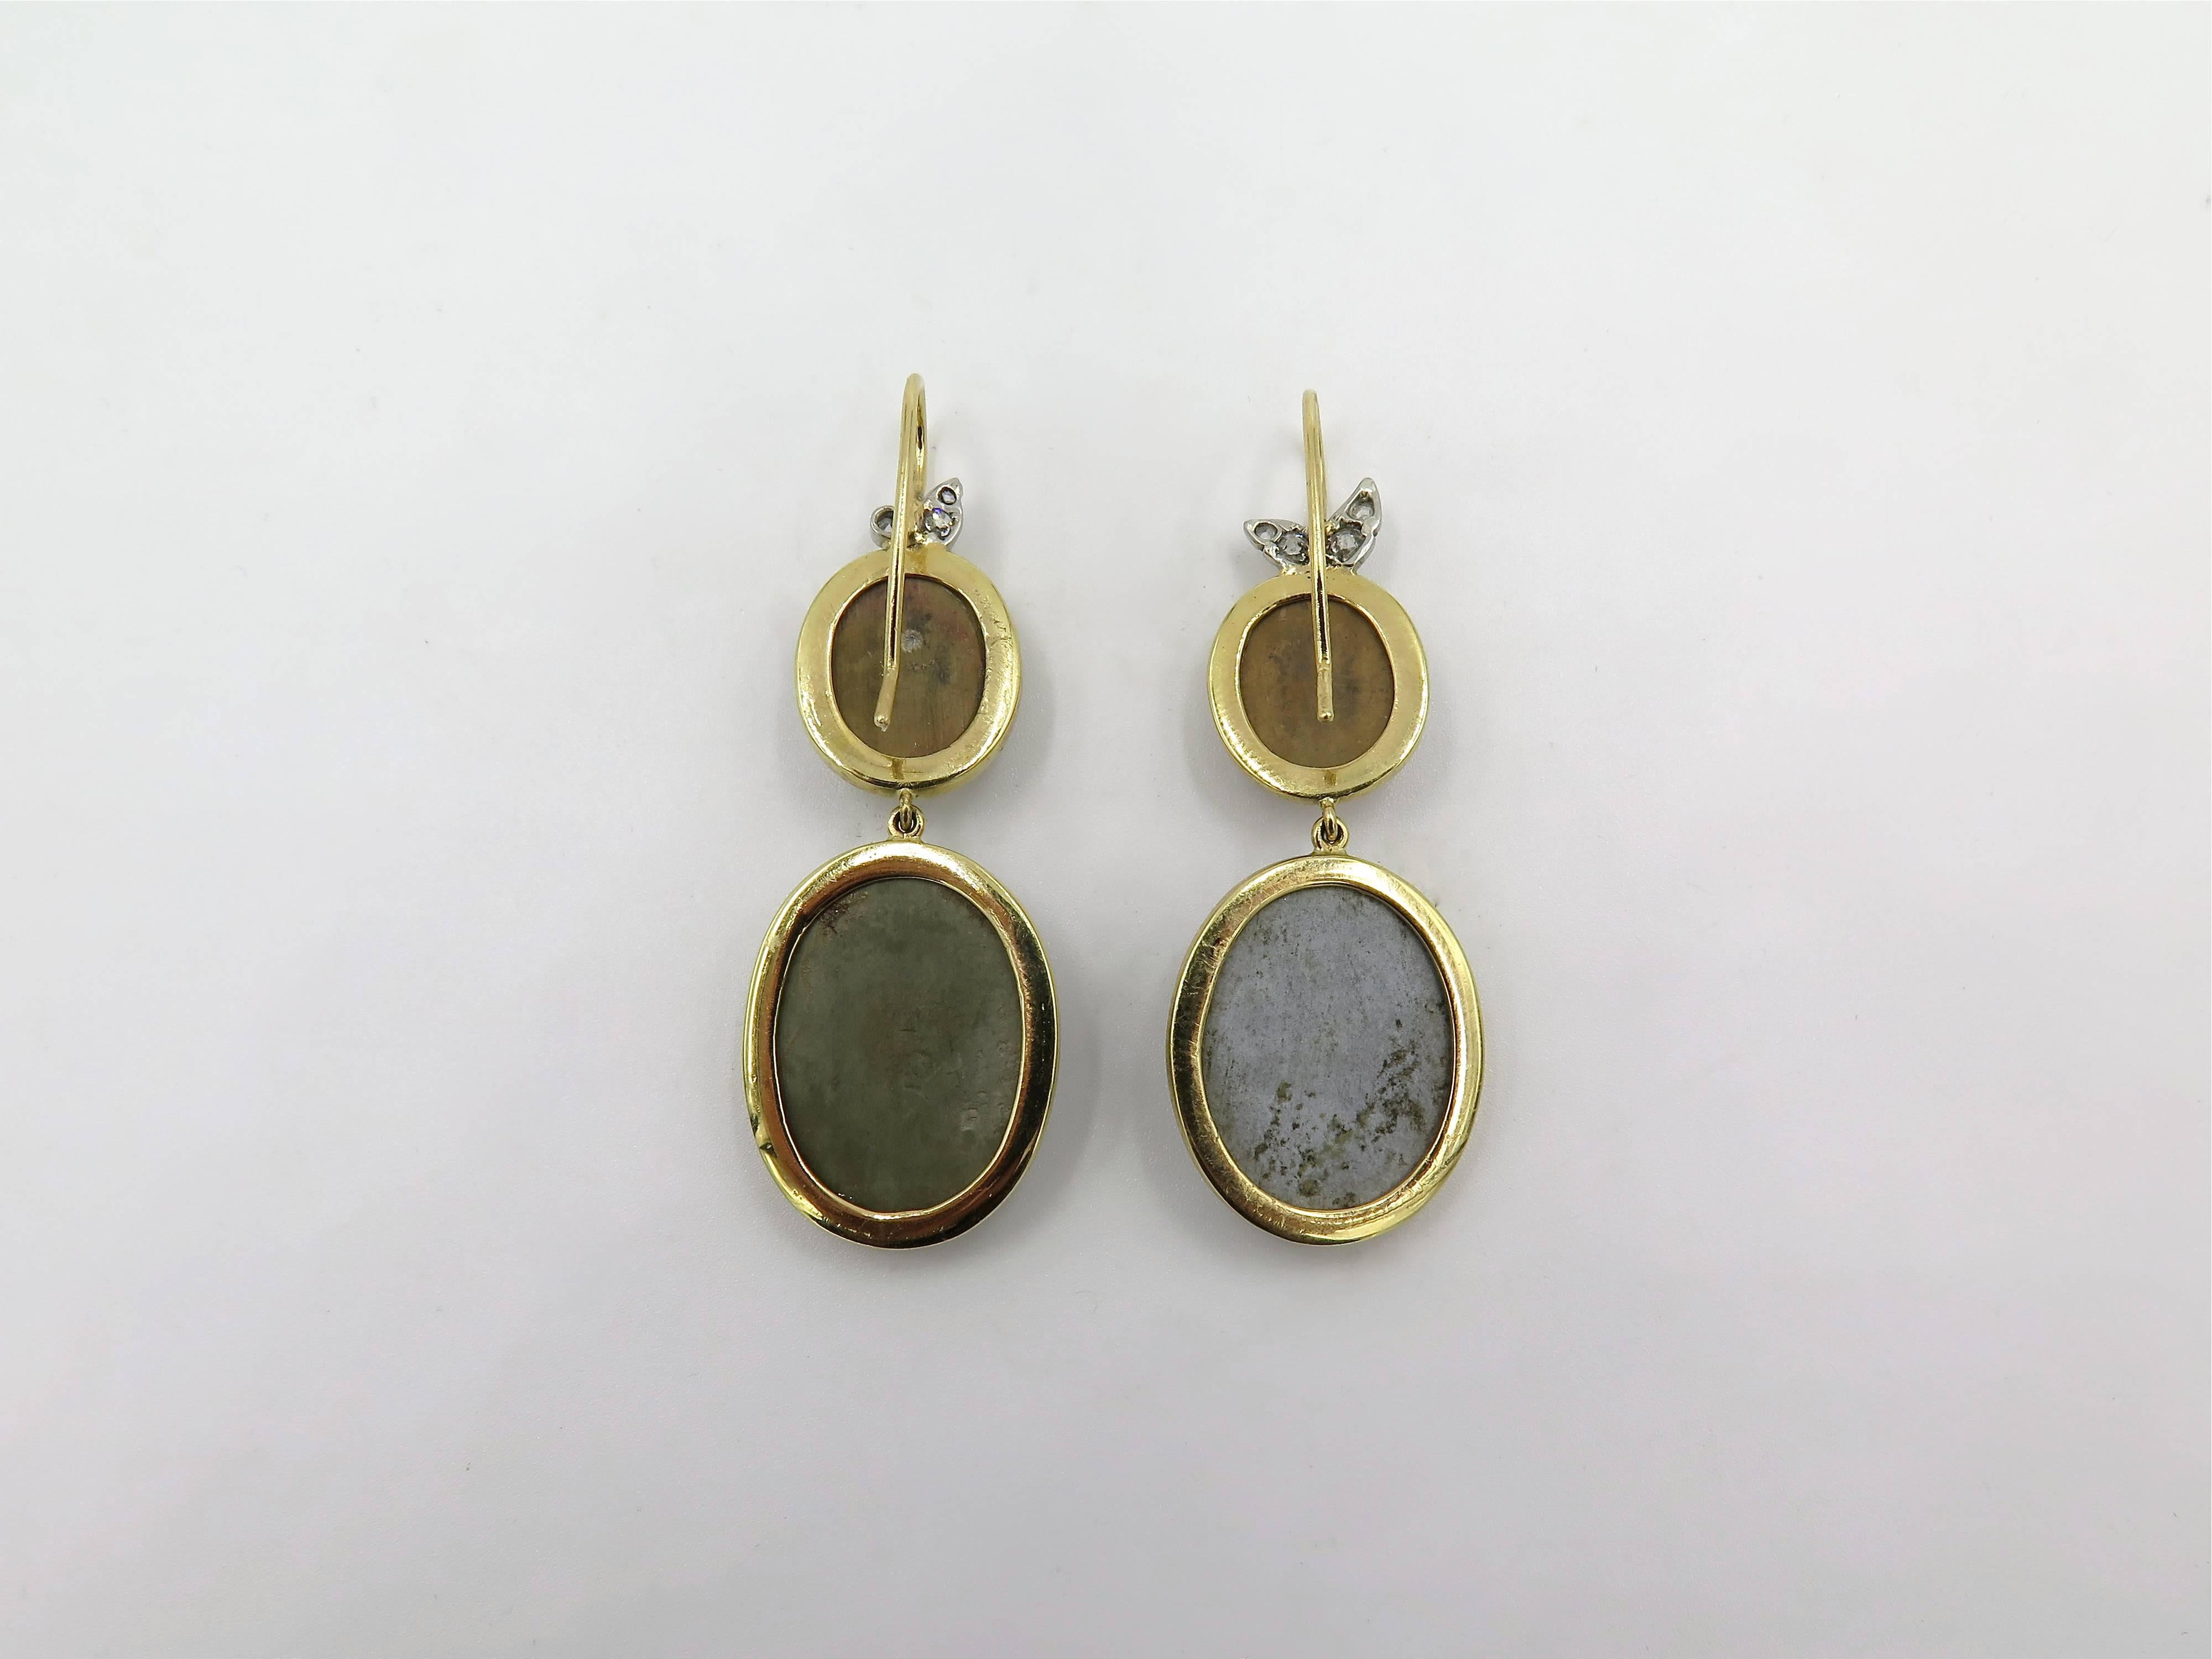 A pair of 18 karat yellow gold, platinum, diamond and bezel-set antique carved lava cameo earrings.  One earring suspends a light grey oval lava cameo depicting a bust of a woman in classical dress from a smaller light brown oval camo depicting the